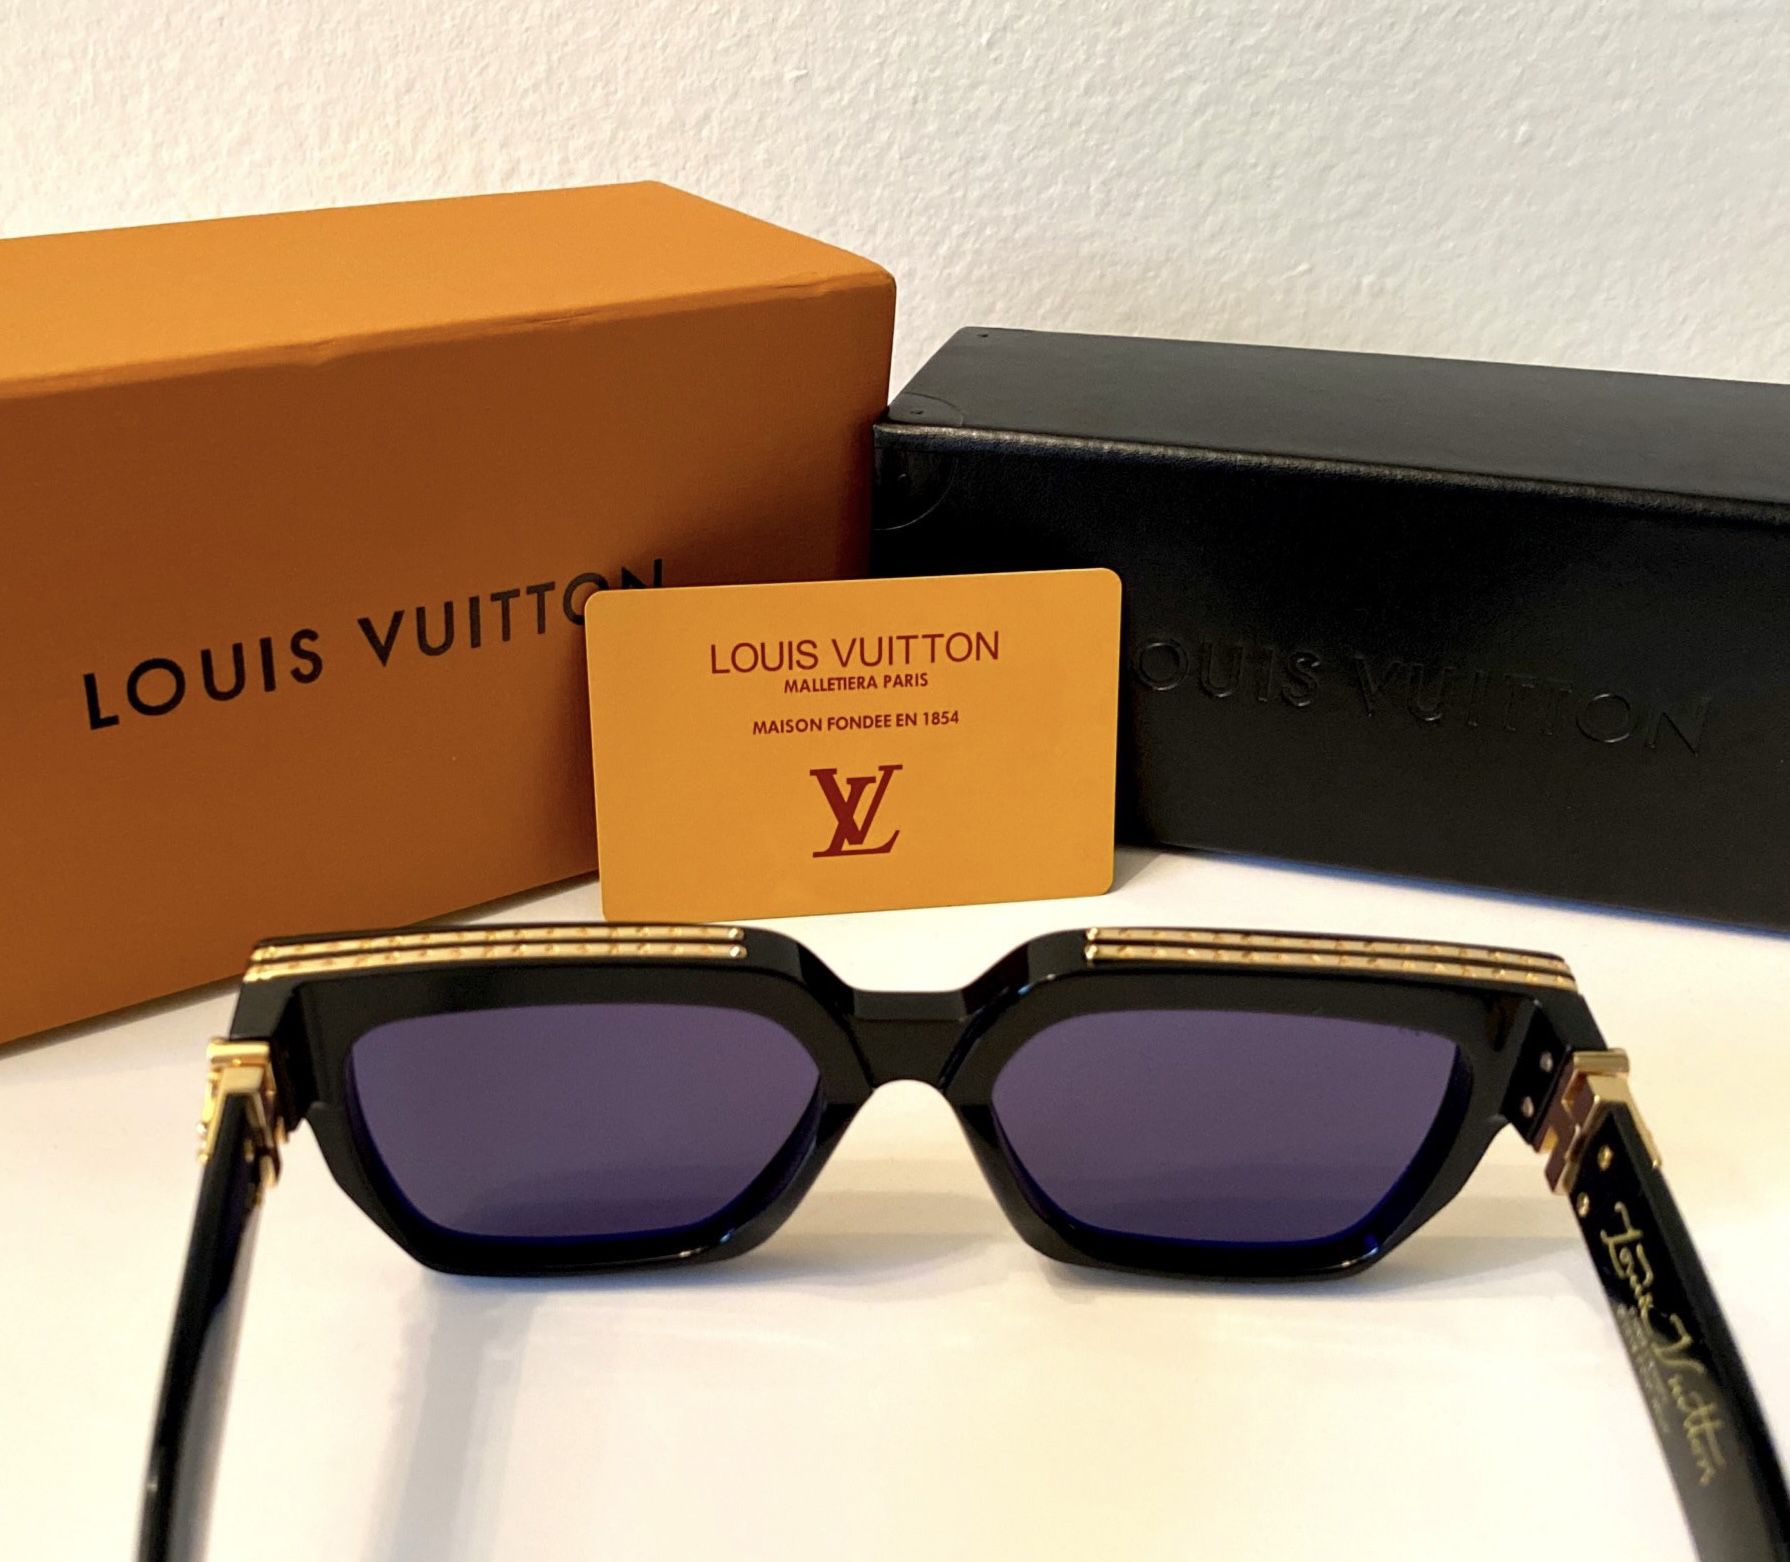 Louis Vuitton Glasses for Sale in Upland, CA - OfferUp